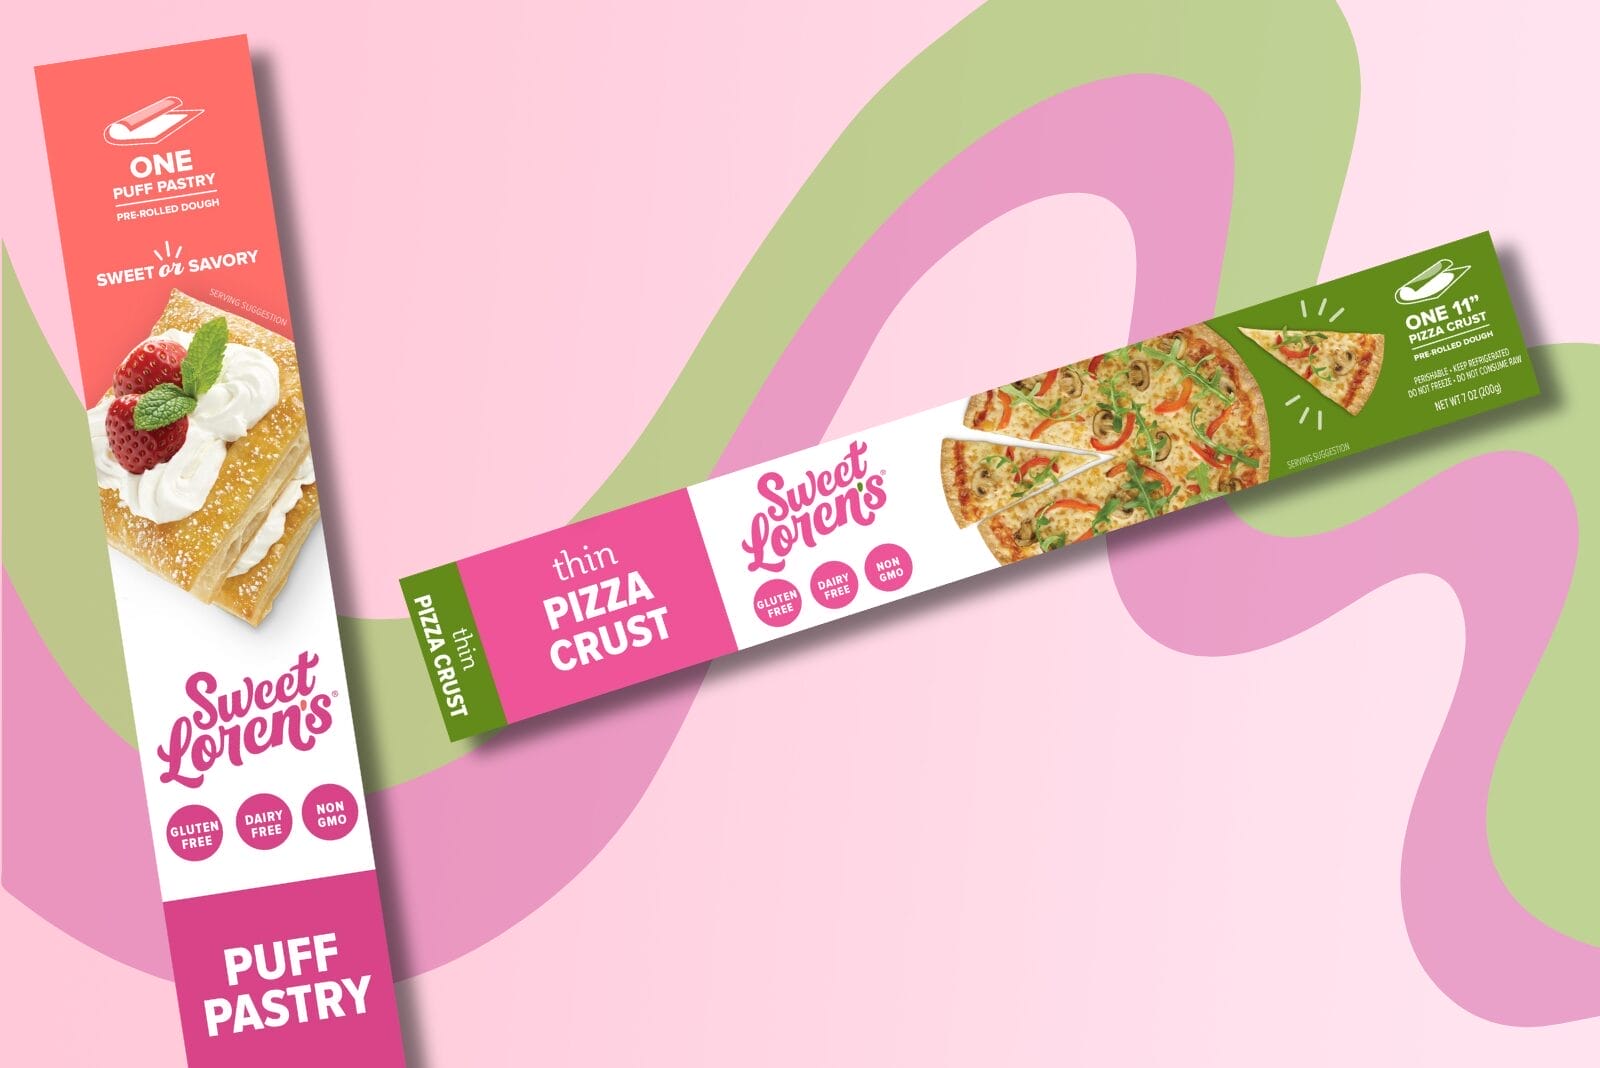 Puff Pastry and Thin Pizza Crust packages on pink and green gradient, swirl background.